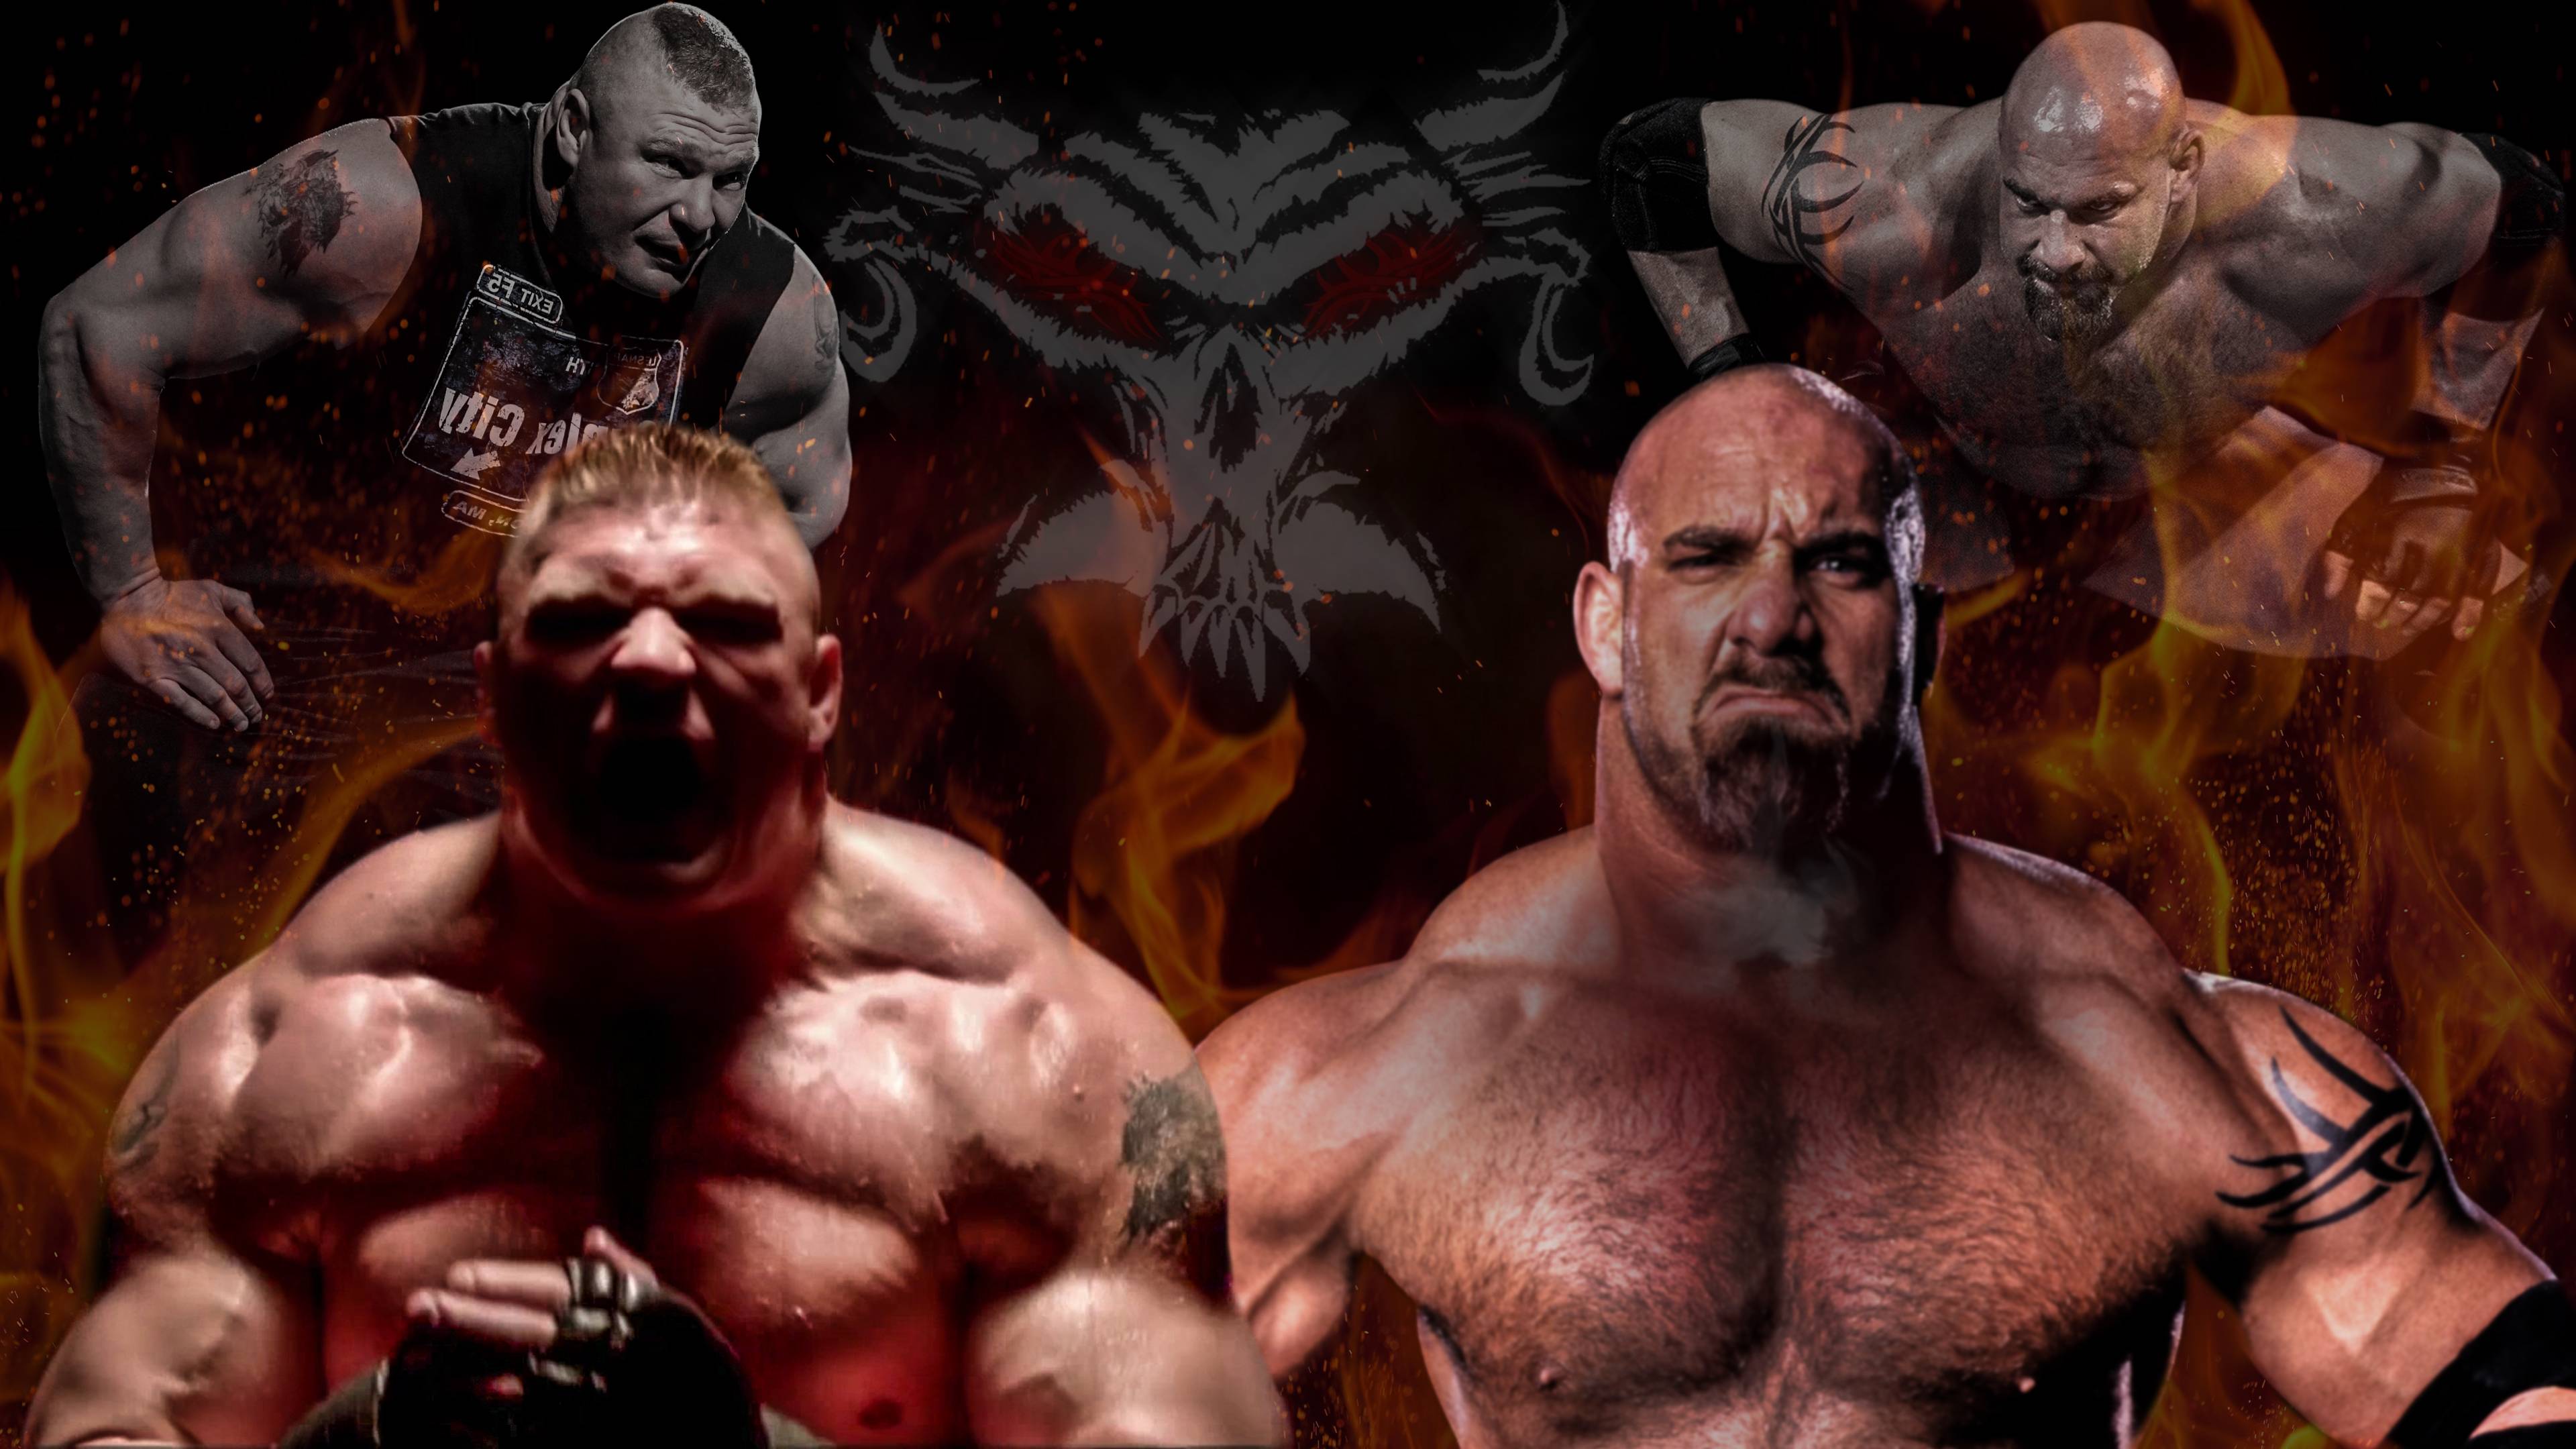 I just made my first wallpaper - Brock Lesnar vs Goldberg. What